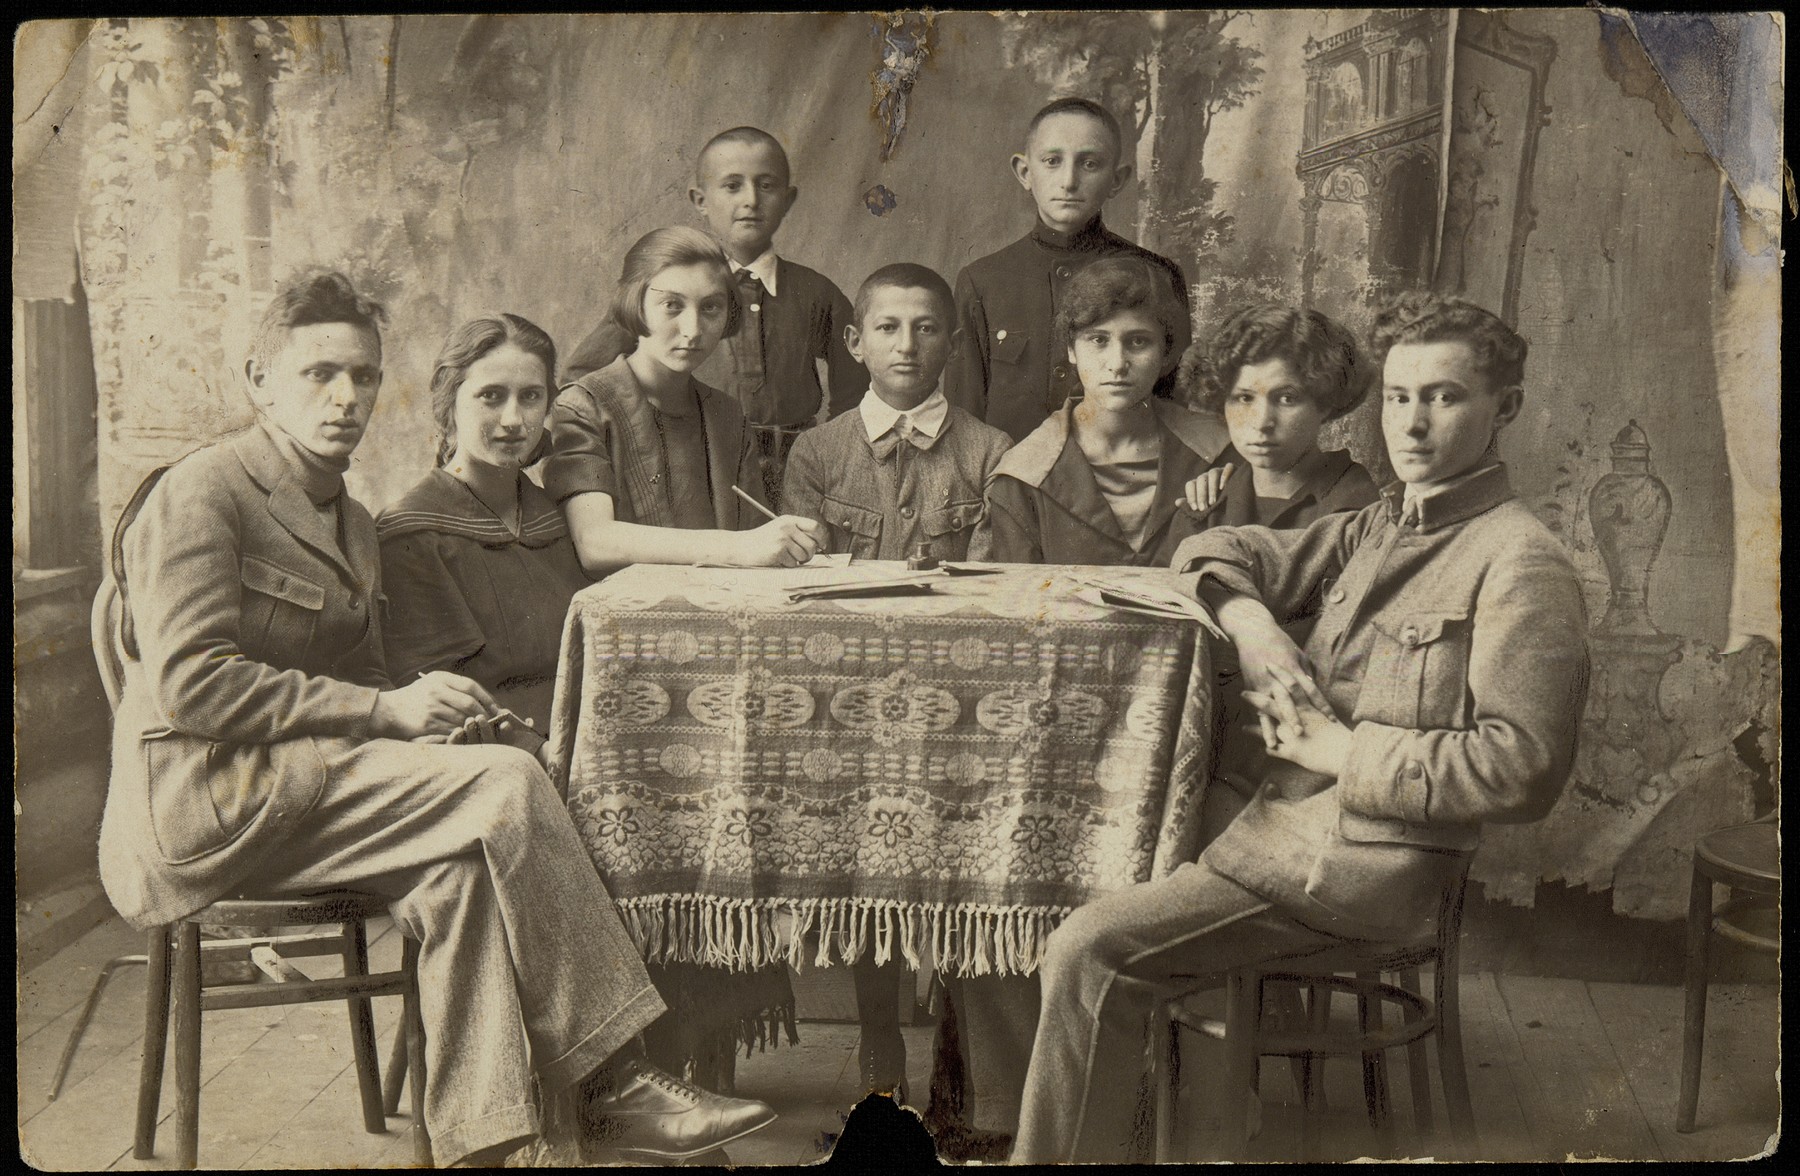 Board members of the Brenner Zionist Club and Jewish National Fund (Keren Kayemet) in Eisiskes, pose around a table.  

Among those pictured are: Peretz Kaleko (sitting at the far right), Leah Koppelman (sitting third from the right), Leibke Sonenson (sitting fourth from the right), and club secretary, Zipporah (Katz) Sonenson (fifth from the right). Peretz Kaleko and his wife Leah Koppelman immigrated to Palestine before the war.  Leibke Sonenson was killed by the Germans in the September 1941 mass shooting action in Eisiskes.